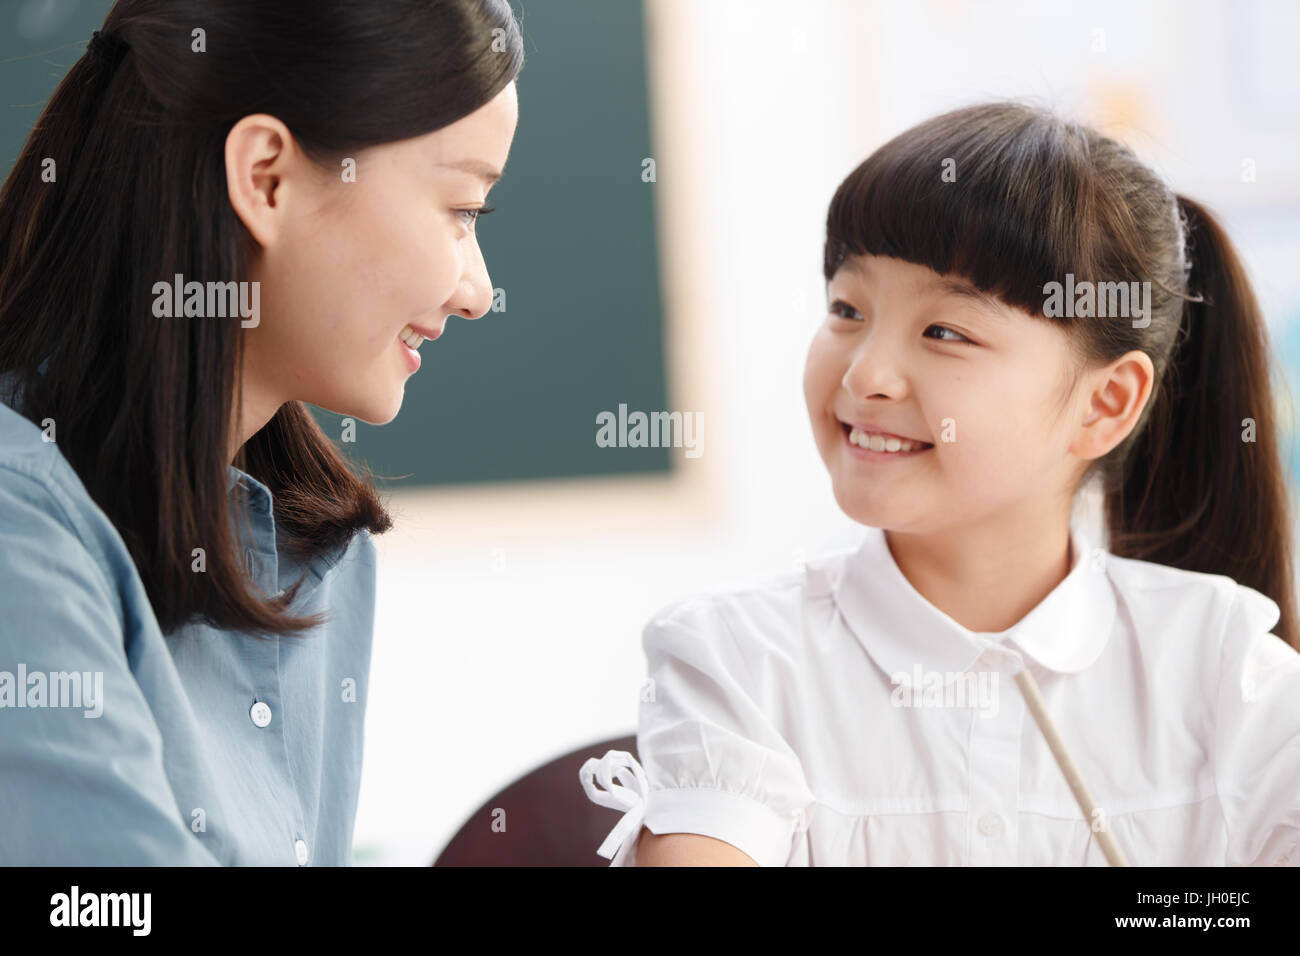 Female teacher helping student studying in classroom Stock Photo